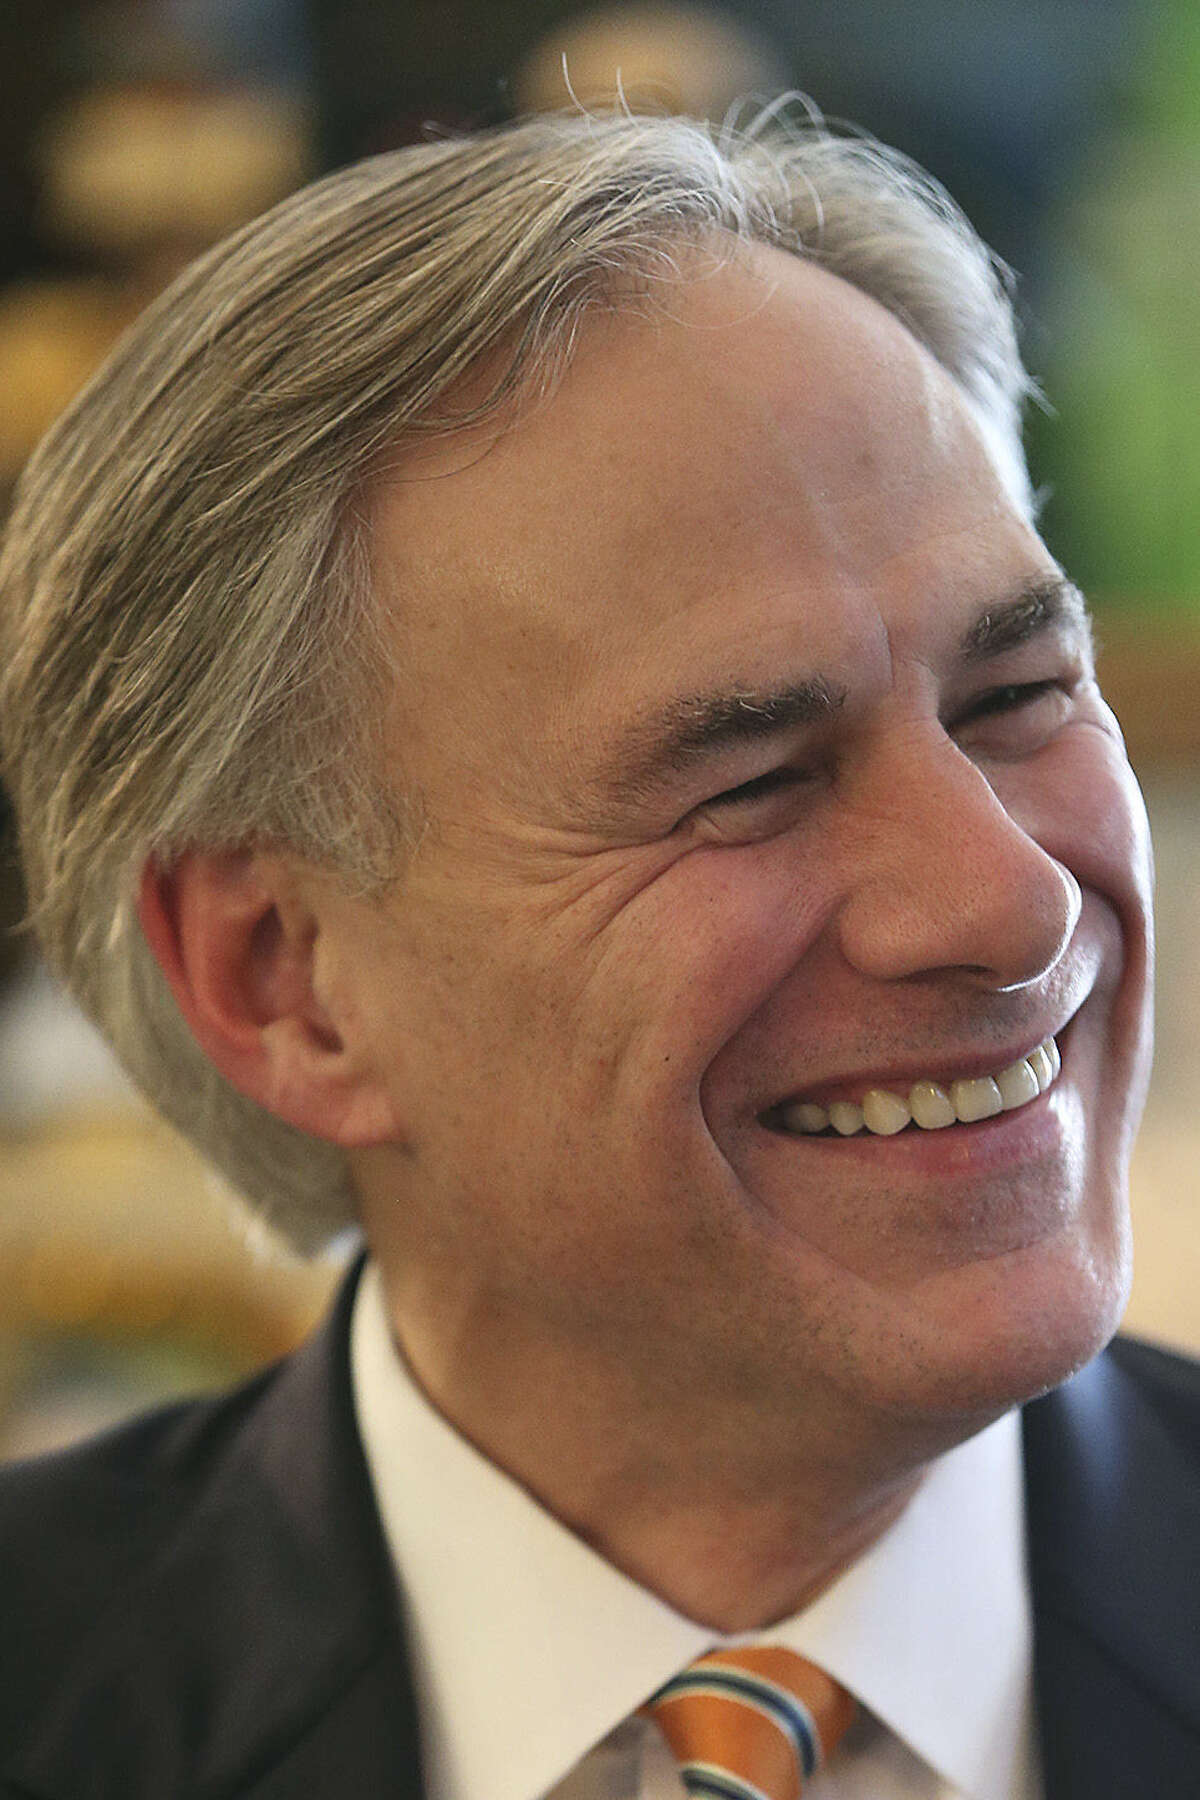 Texas AG Greg Abbott came under fire for recent comments about political corruption.